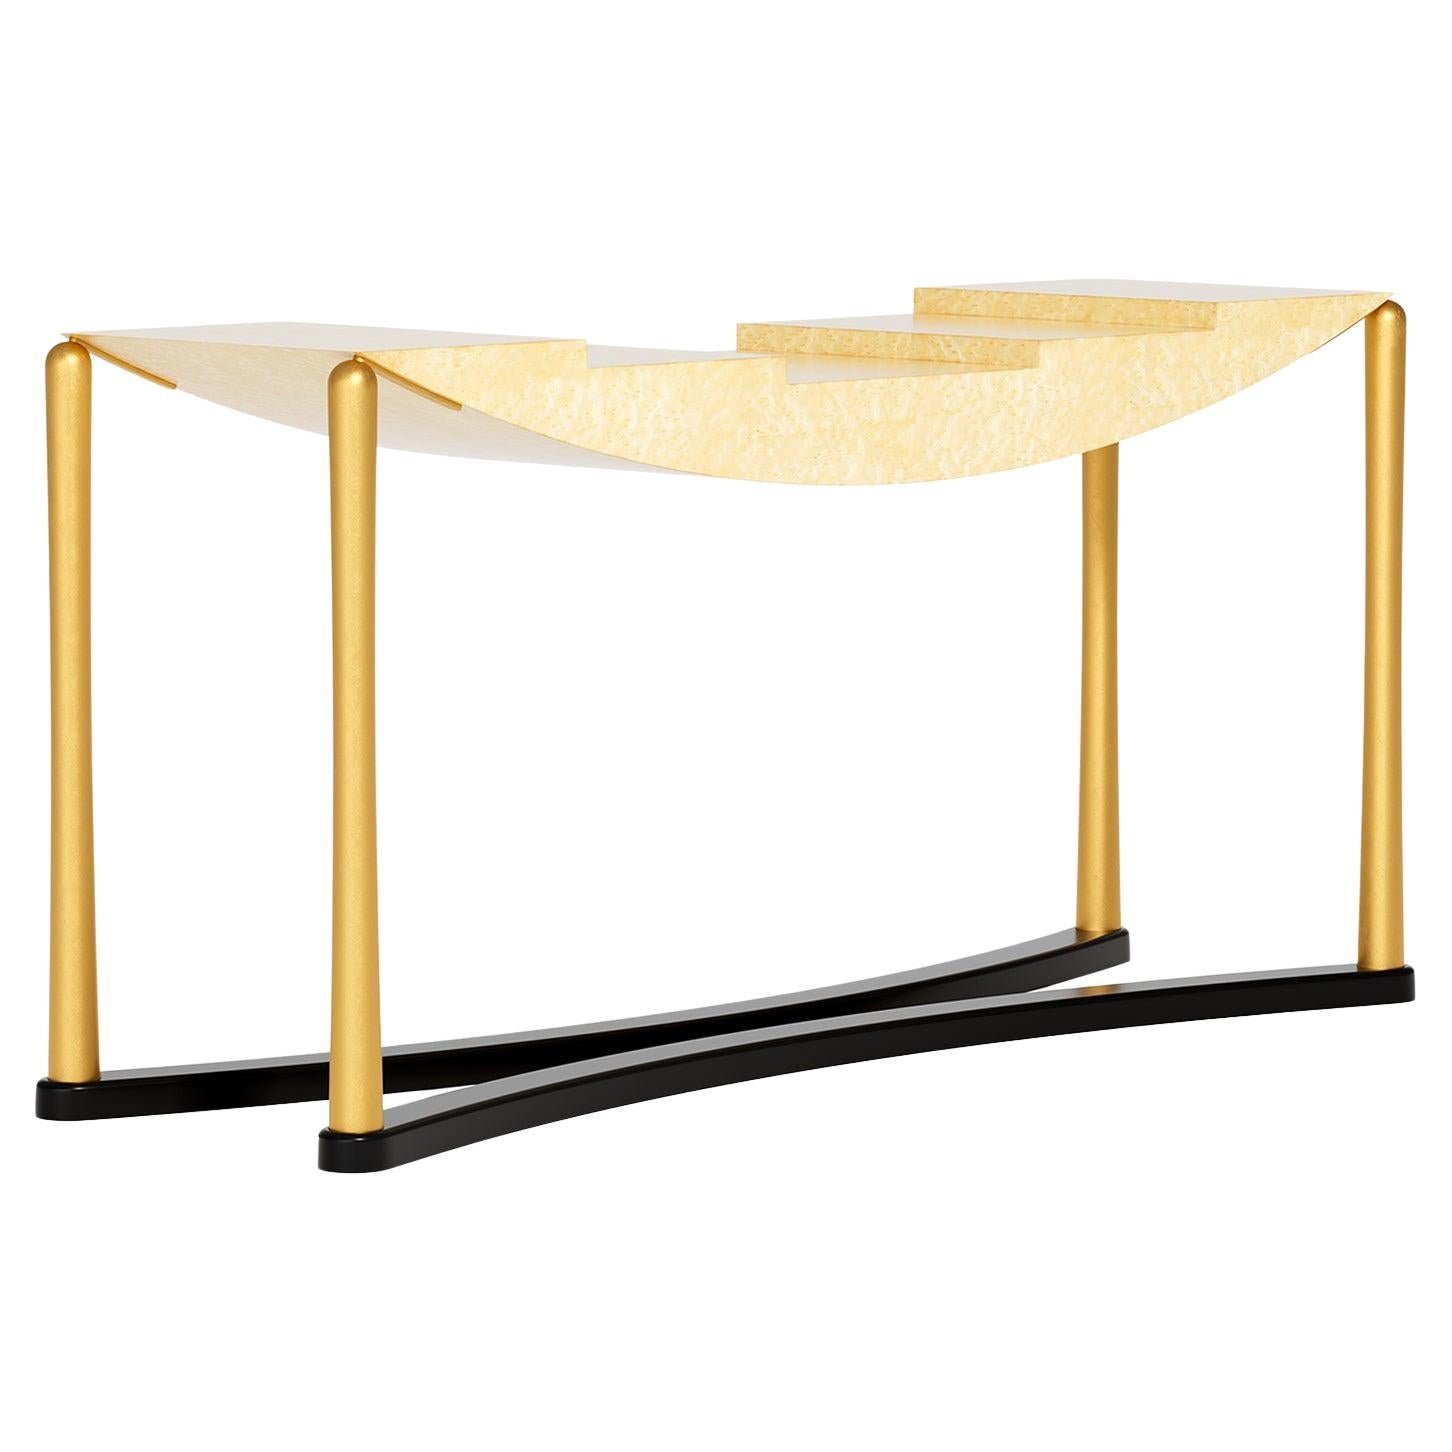 Schwarzenberg Console Table By Hans Hollein for Memphis Milano Collection